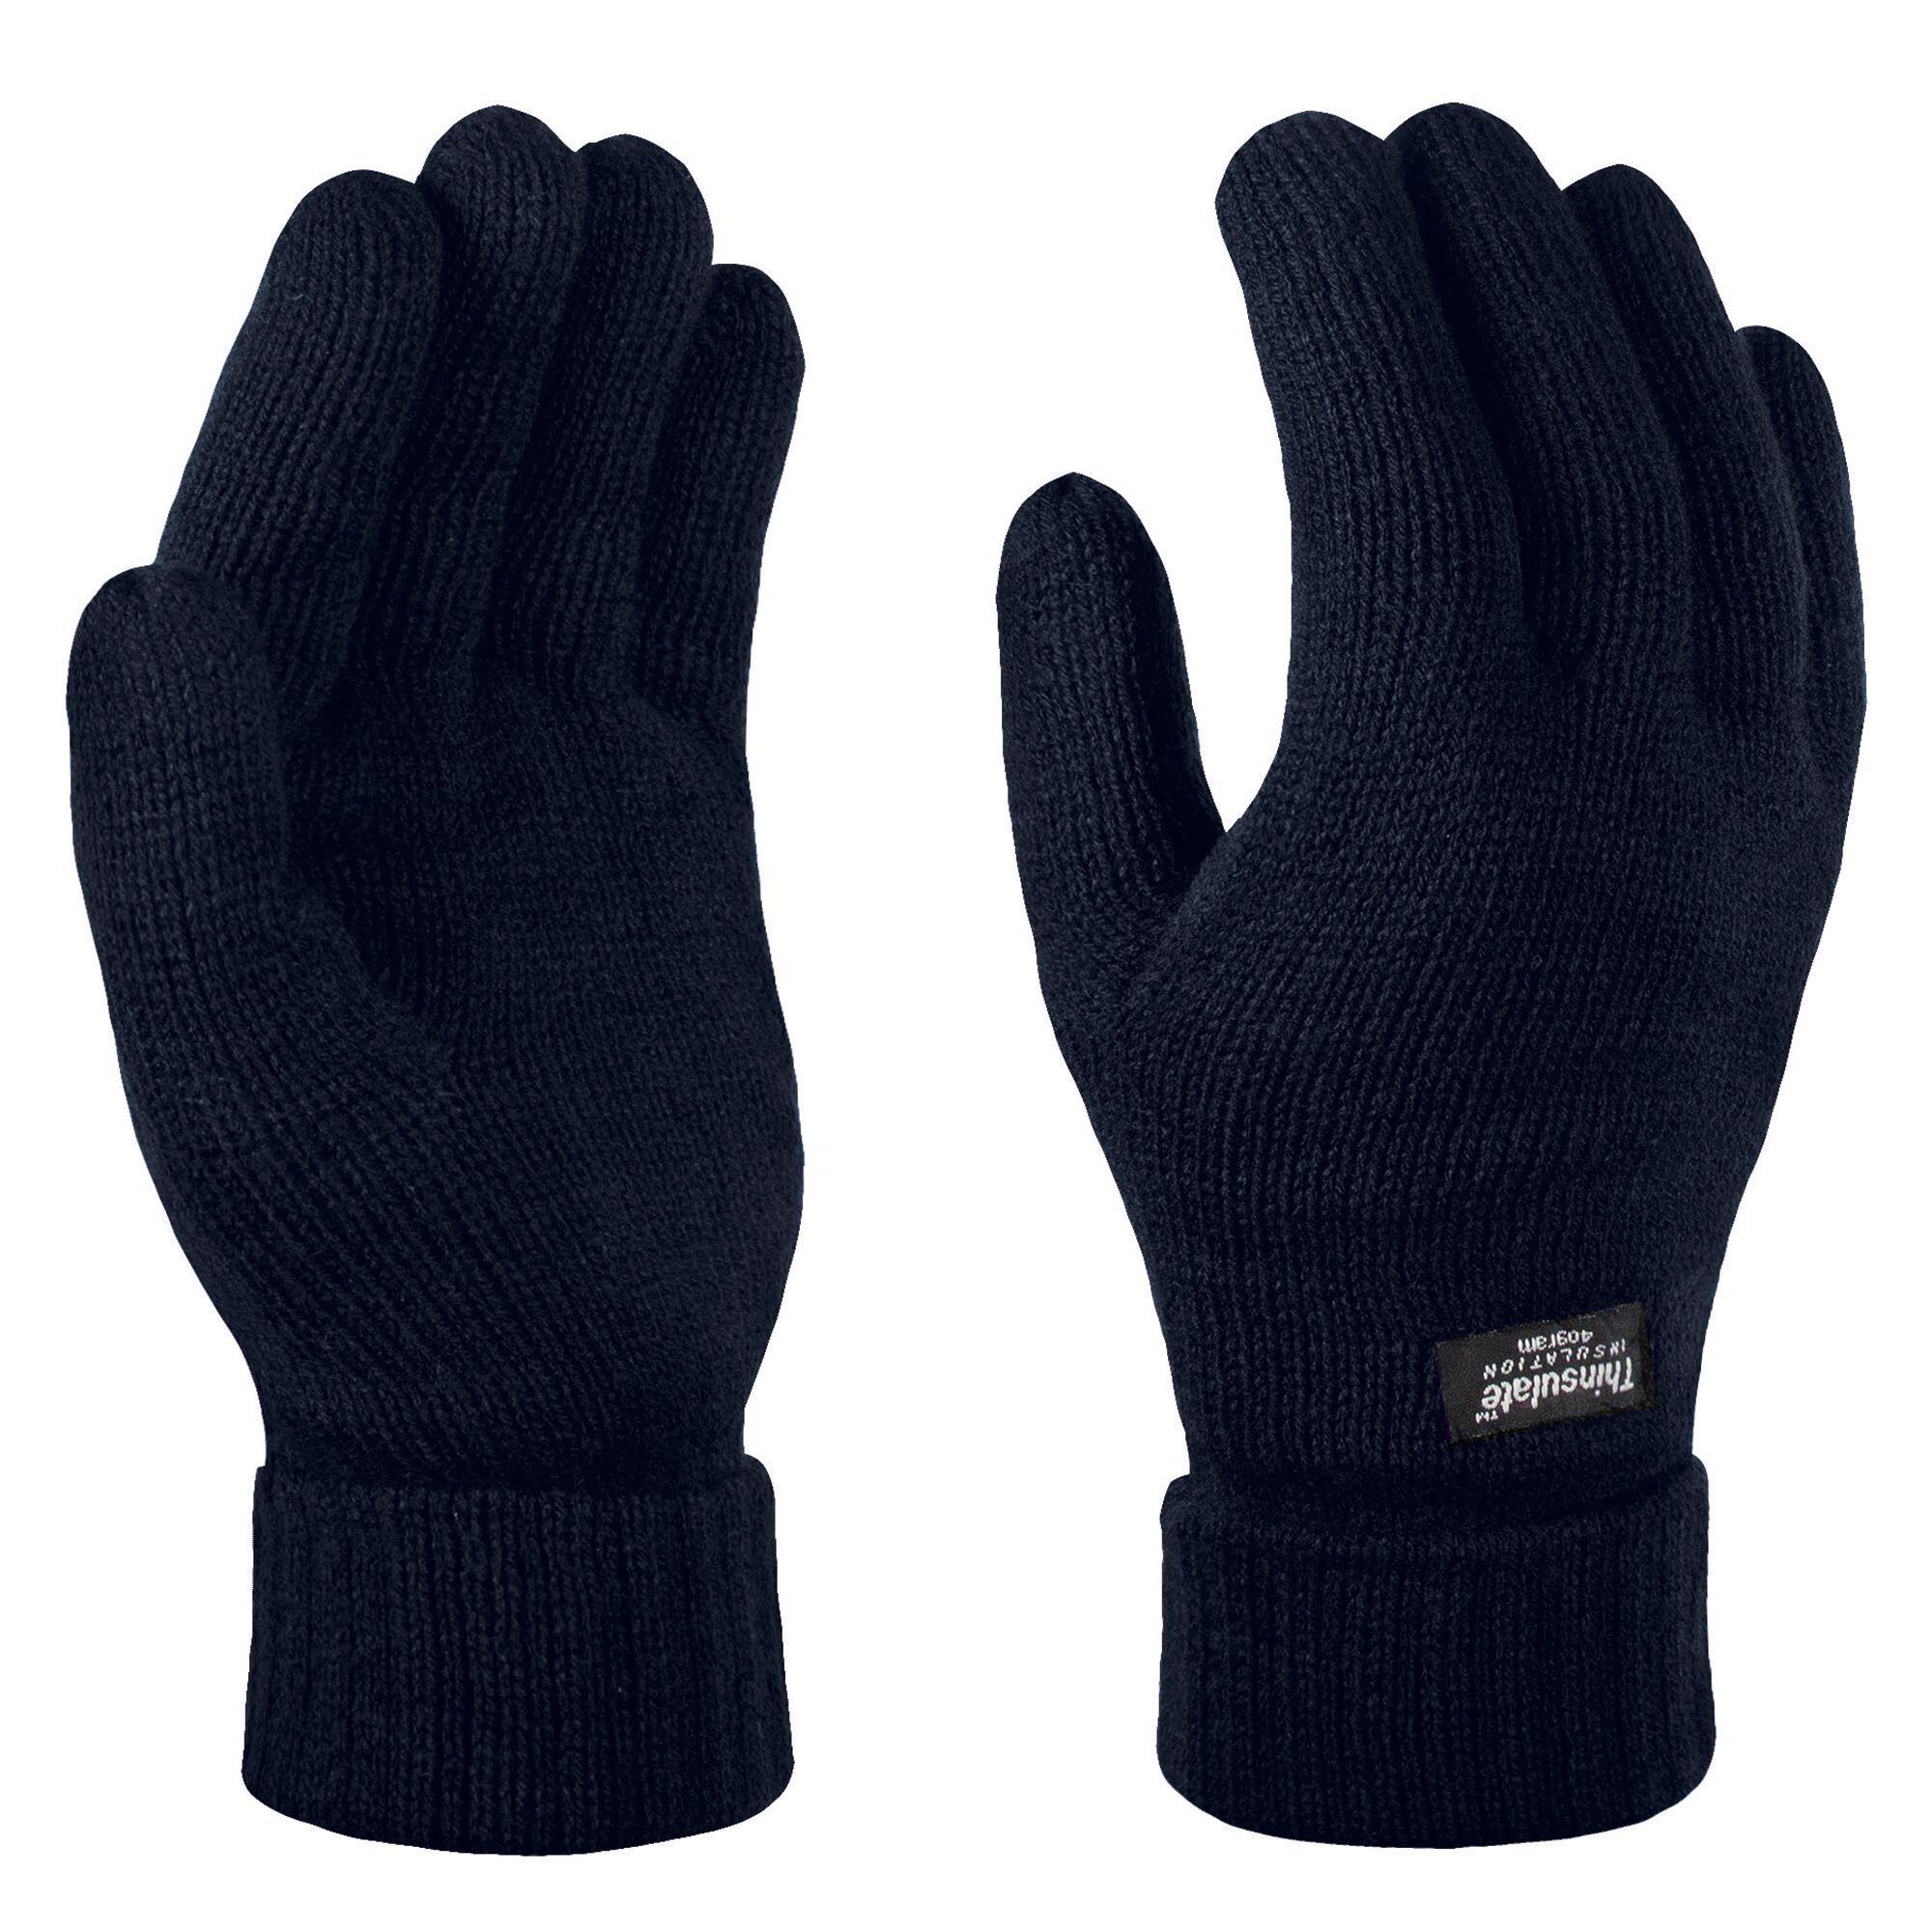 Unisex Thinsulate Thermal Winter Gloves (Navy) 1/4